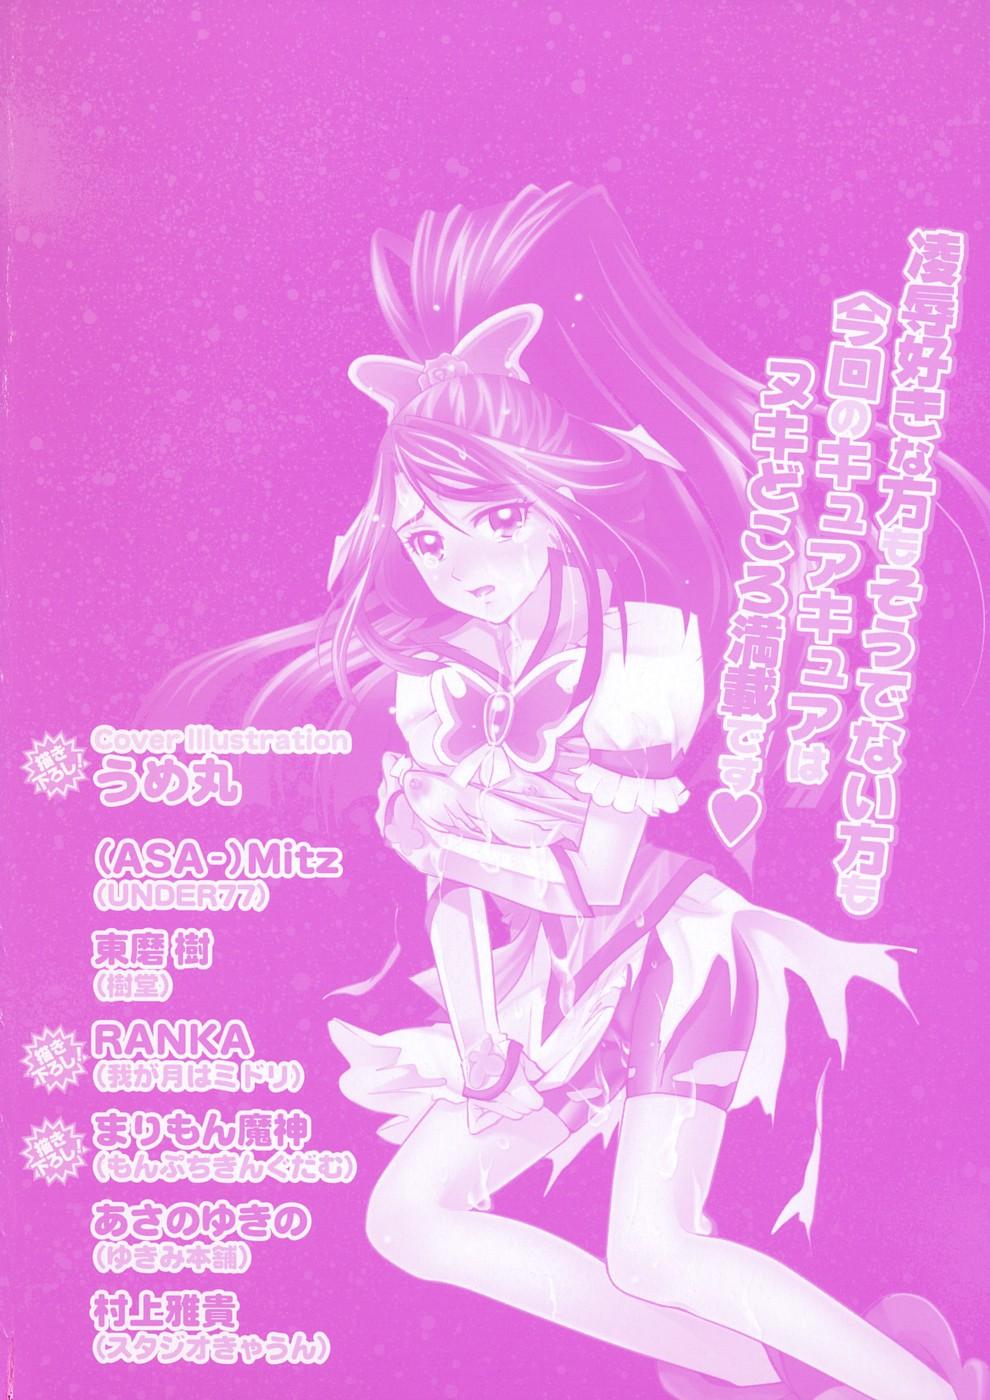 Family Cure Cure Ryoujoku Emaki Pre●ure EroParoAnthology - Pretty cure Yes precure 5 Love Making - Page 3